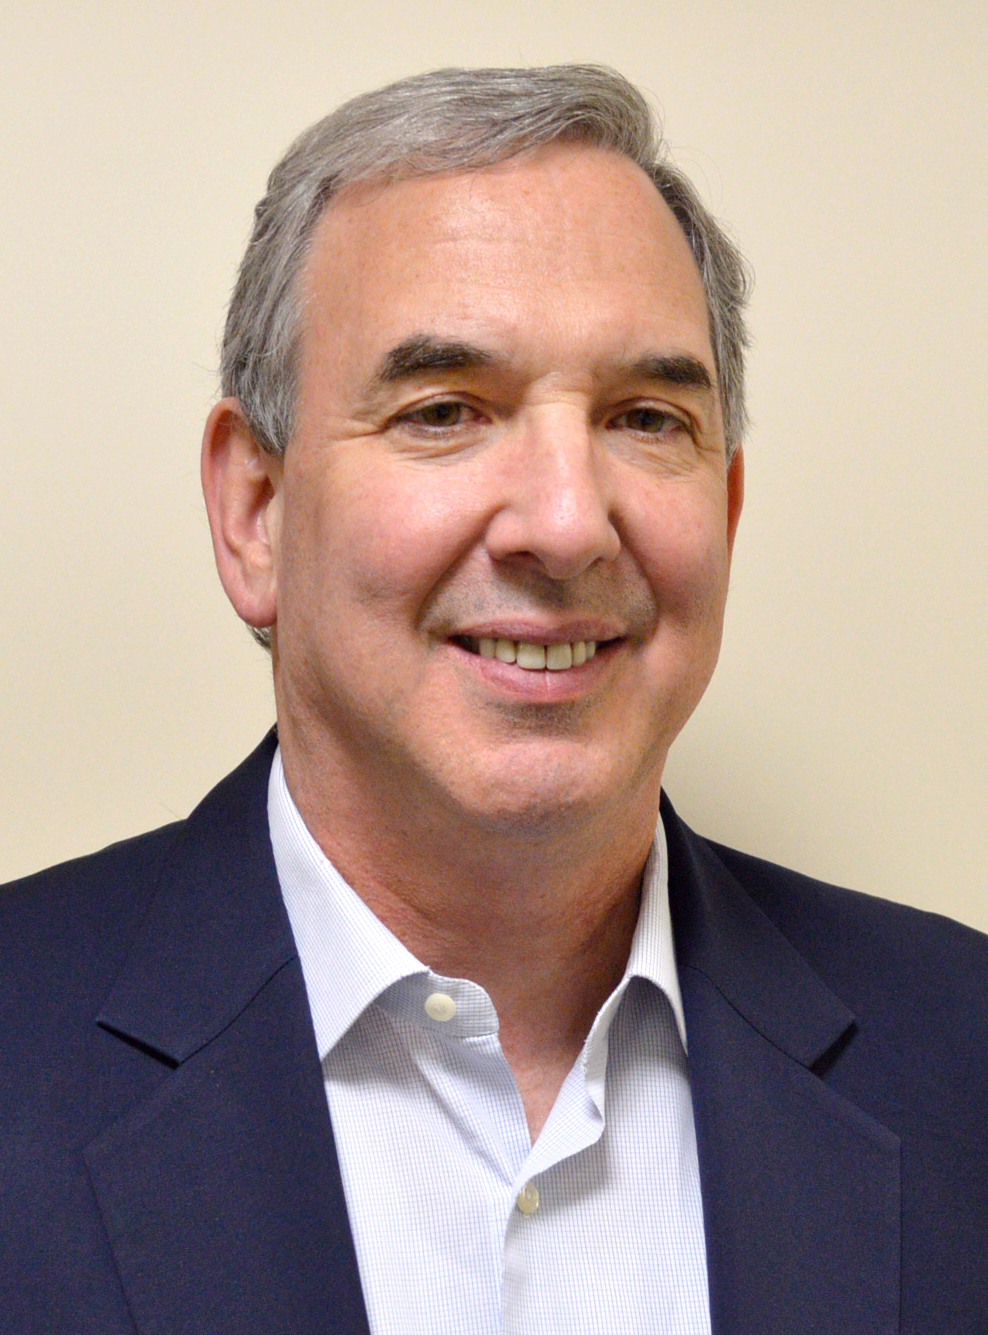 Rob Panariello, Founding Partner and Chief Clinical Officer at Professional Physical Therapy